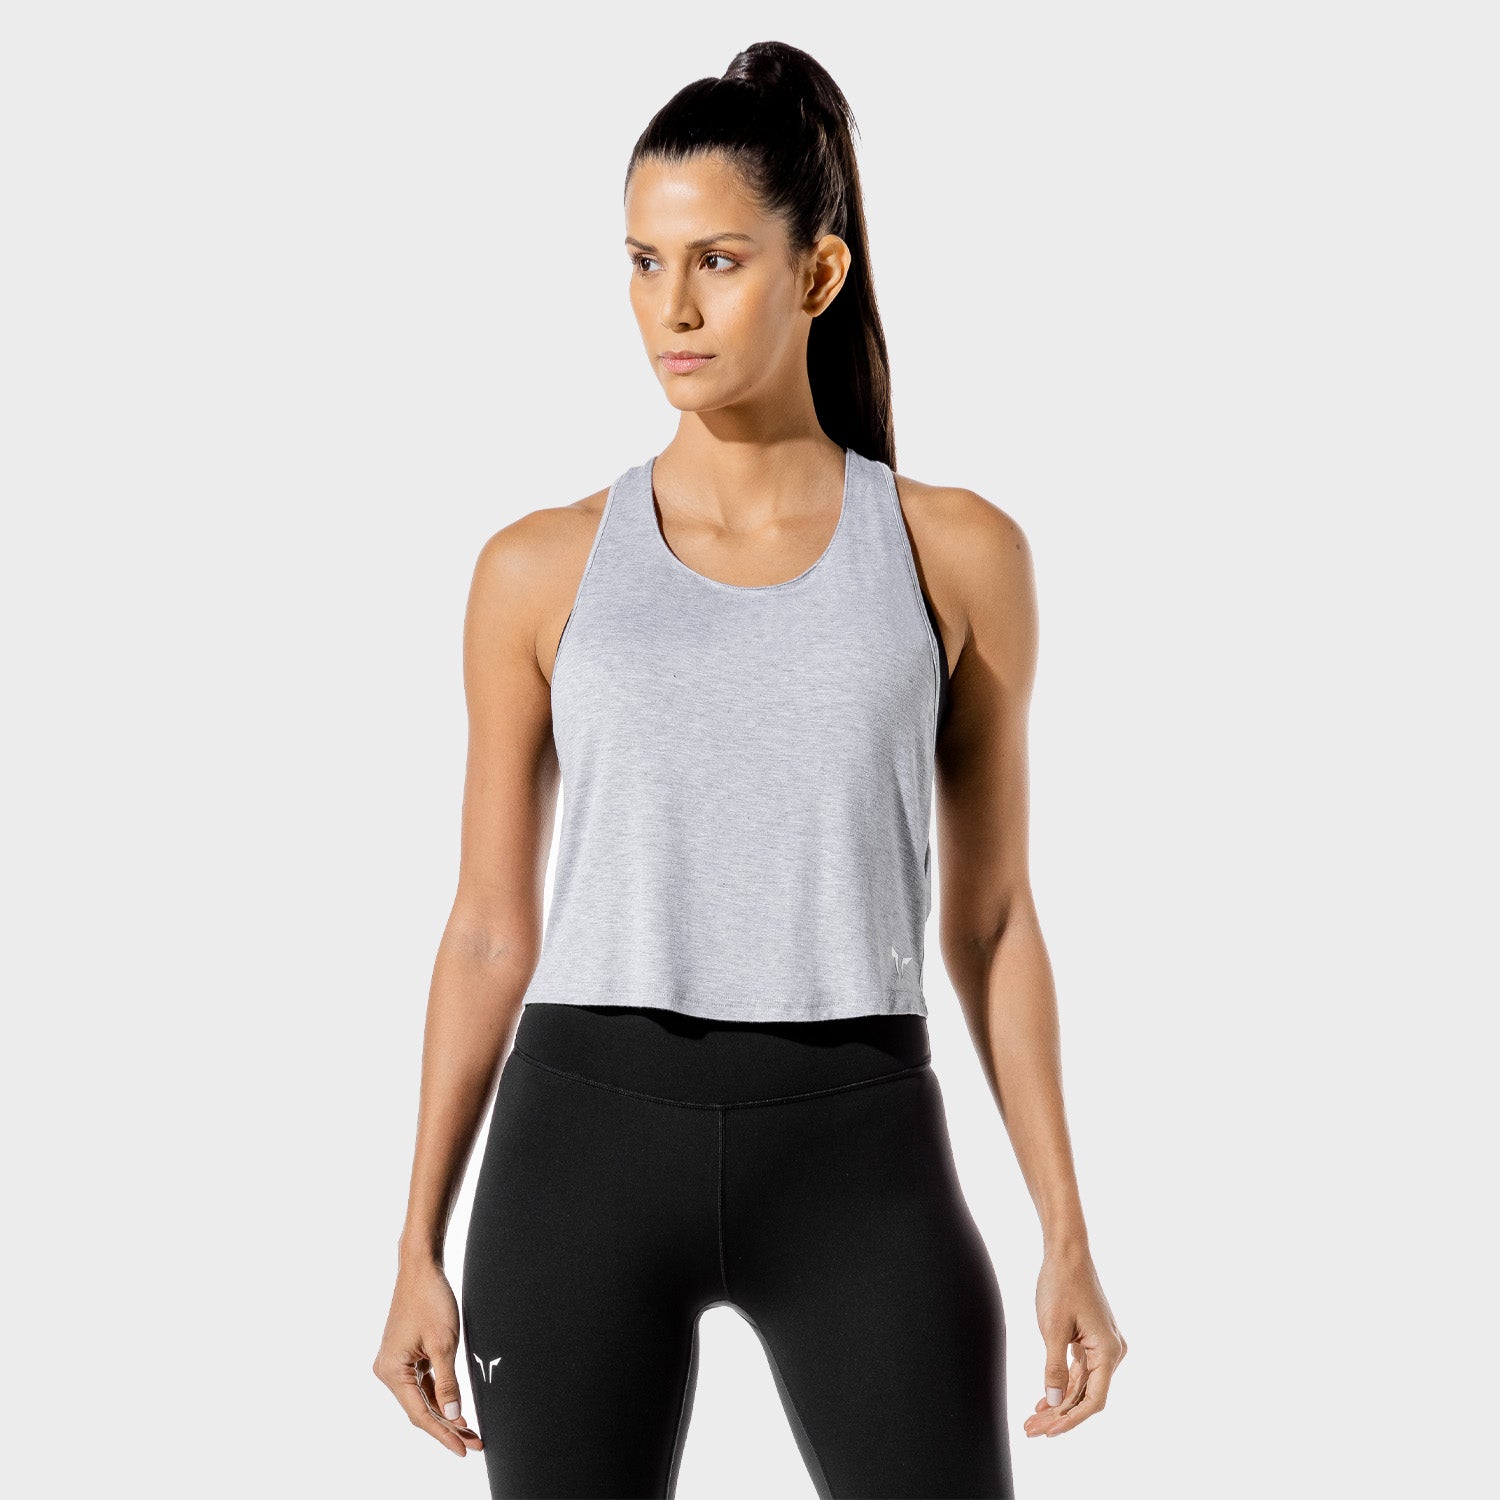 squatwolf-workout-clothes-womens-fitness-wrap-tank-grey-gym-tank-tops